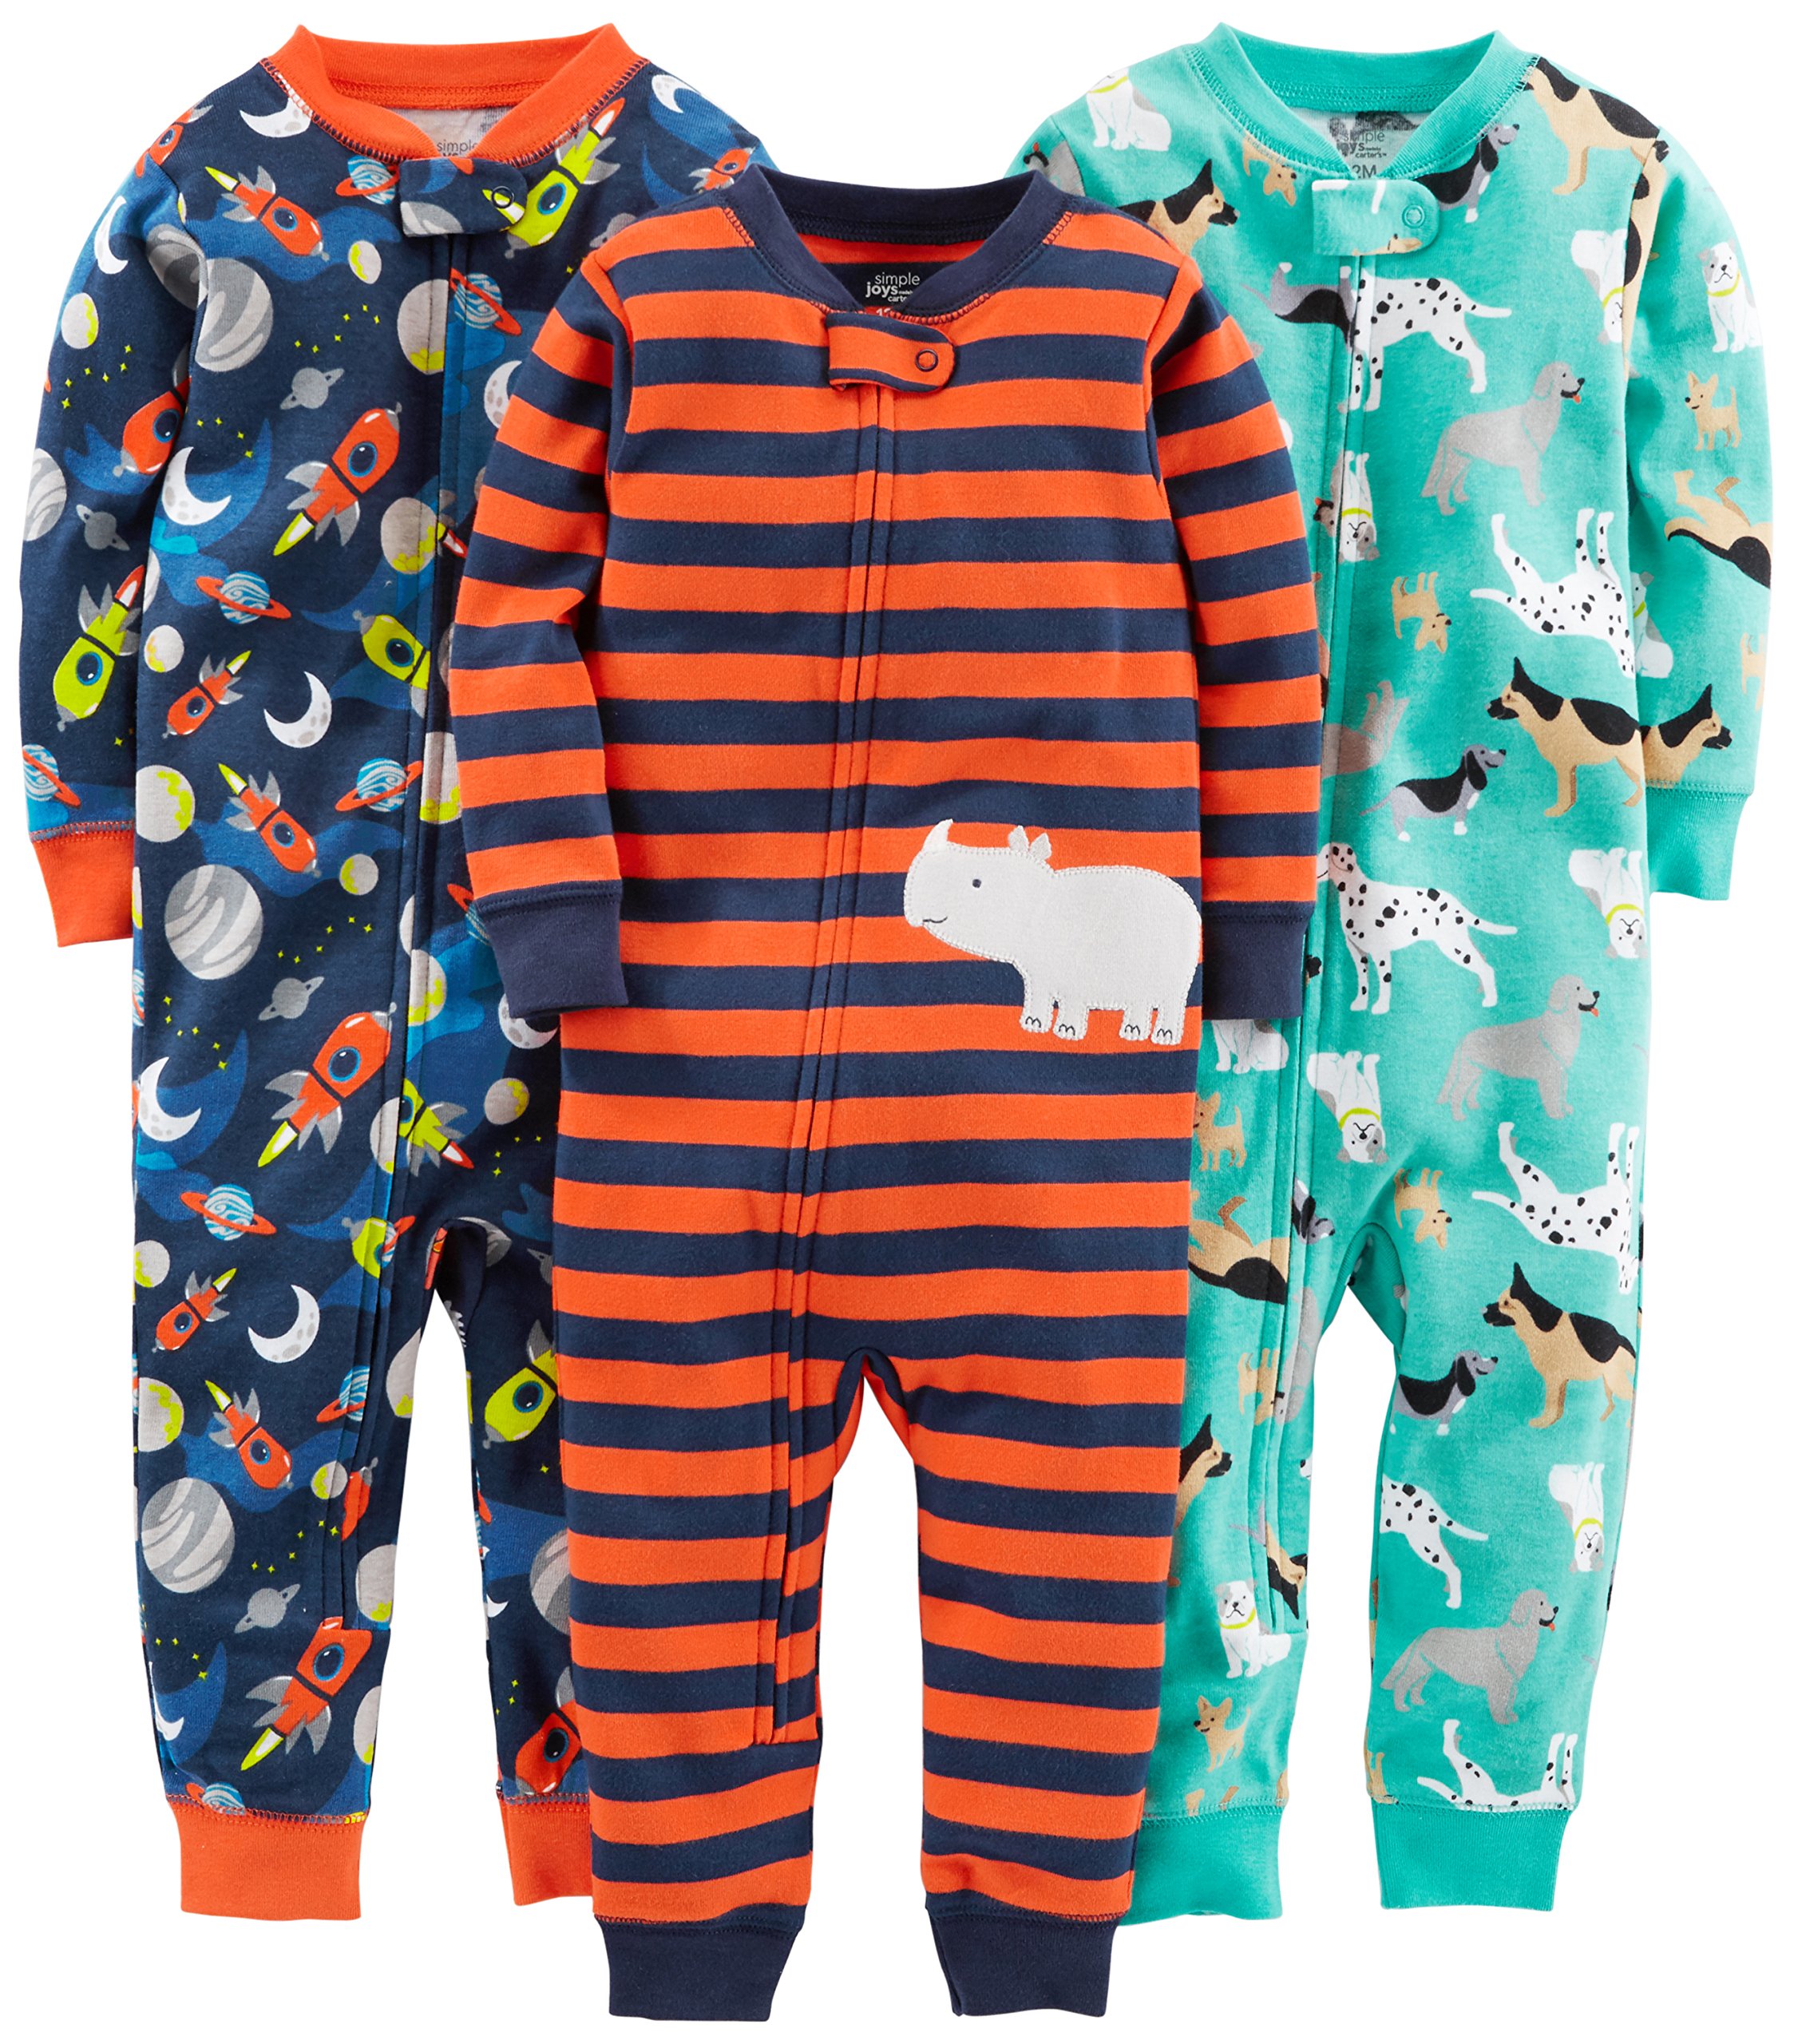 Simple Joys by Carter's Toddlers and Baby Boys' Snug-Fit Footless Cotton Pajamas, Pack of 3